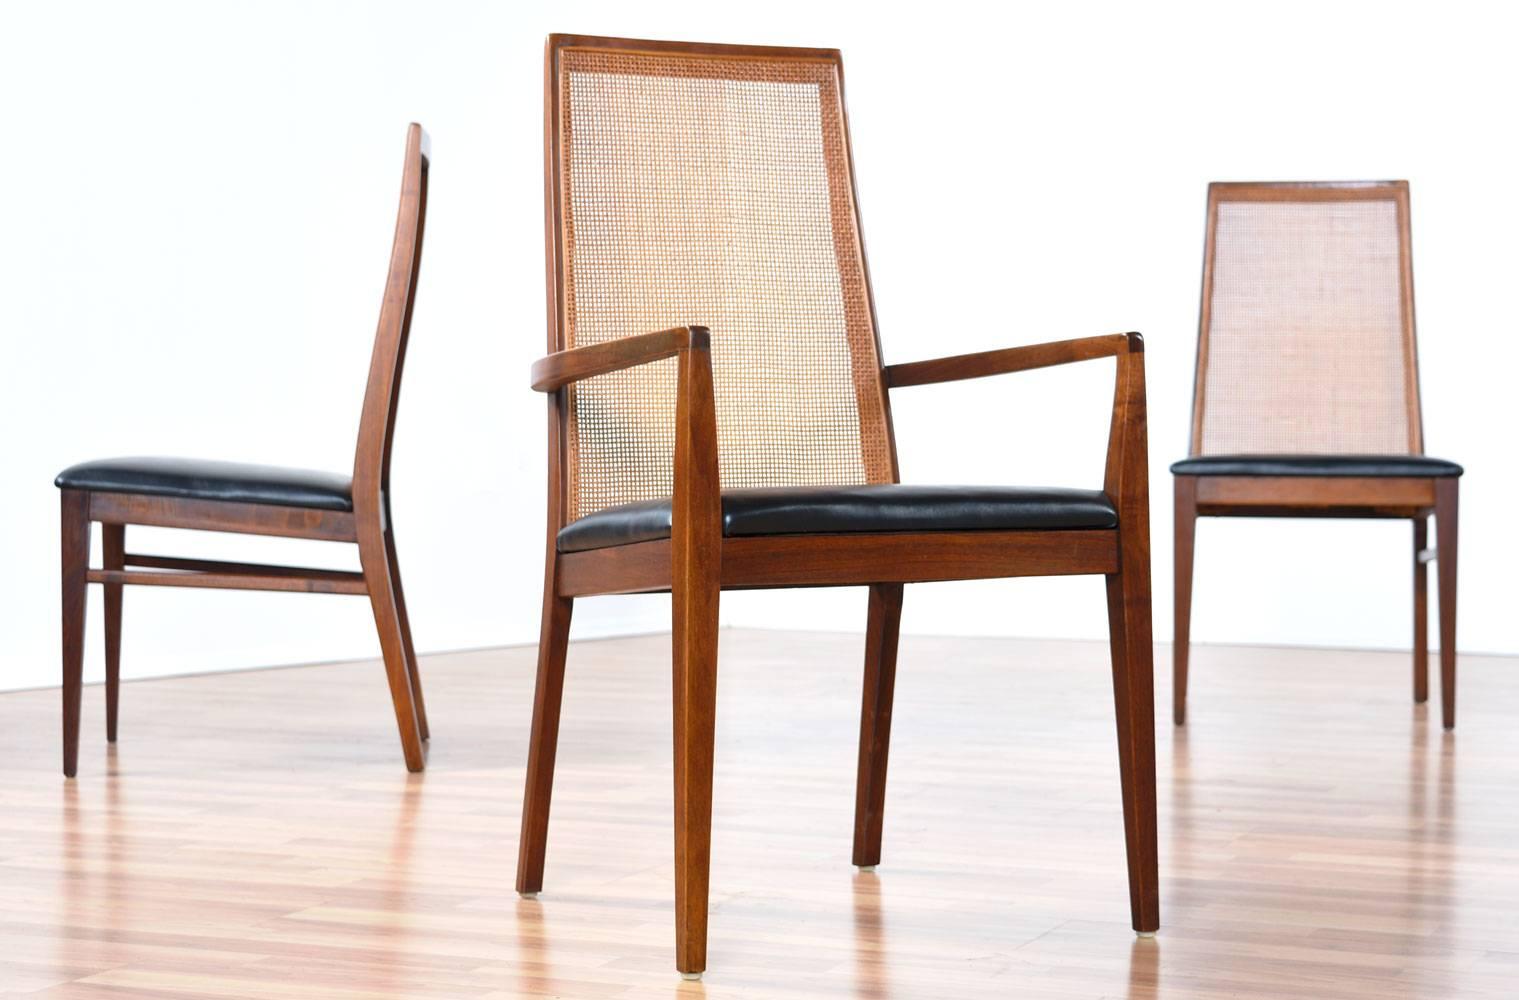 Set of six Milo Baughman for Dillingham walnut dining chairs. This set of six Mid-Century Modern chairs includes two captain's chairs with arms and four armless side chairs. Angled and sleek in design, walnut frames, rattan backs and black seats add